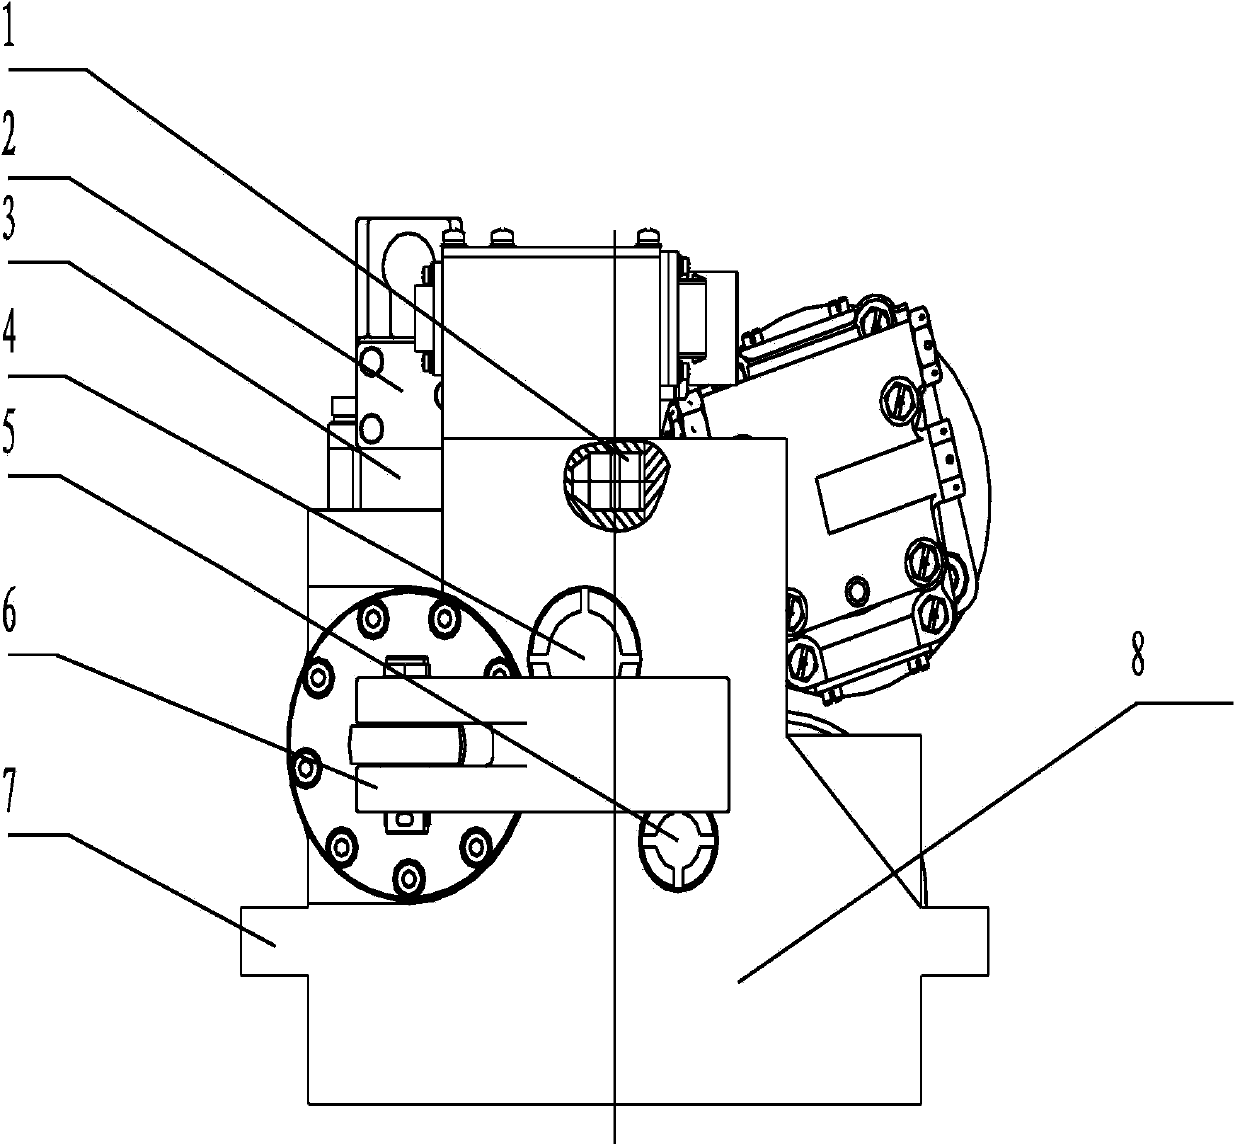 Integrated electro-hydraulic servo mechanism for cabin